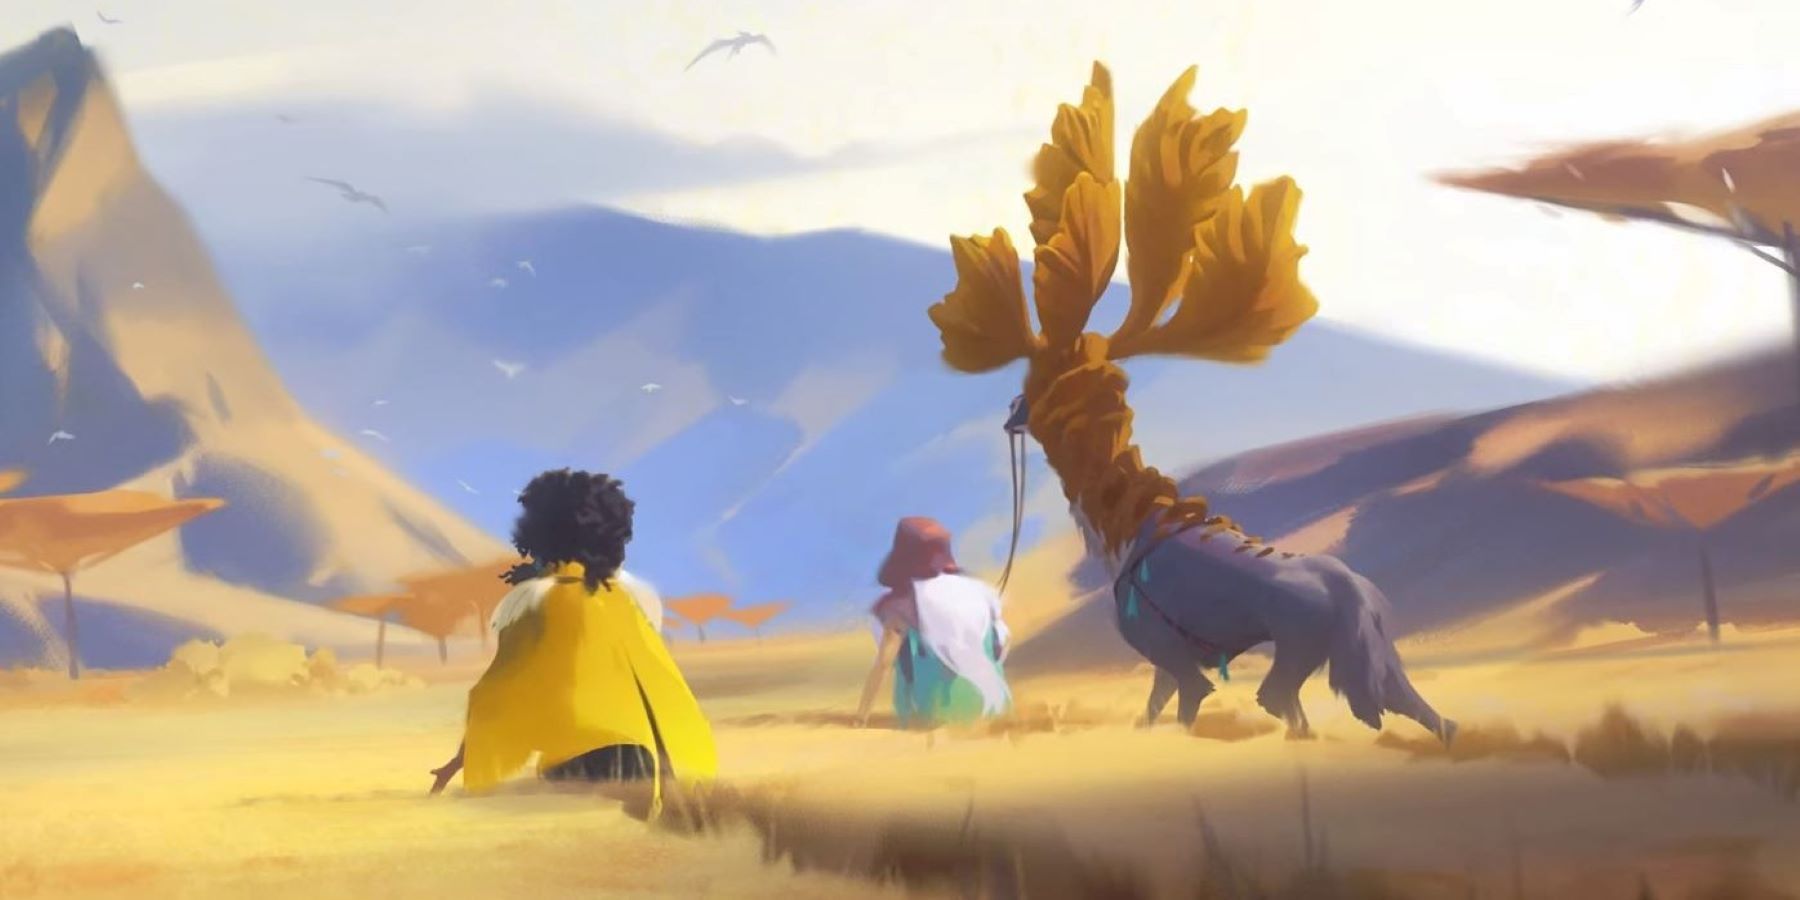 Everwild concept art showing two Eternals and a horned animal walking across a savanna